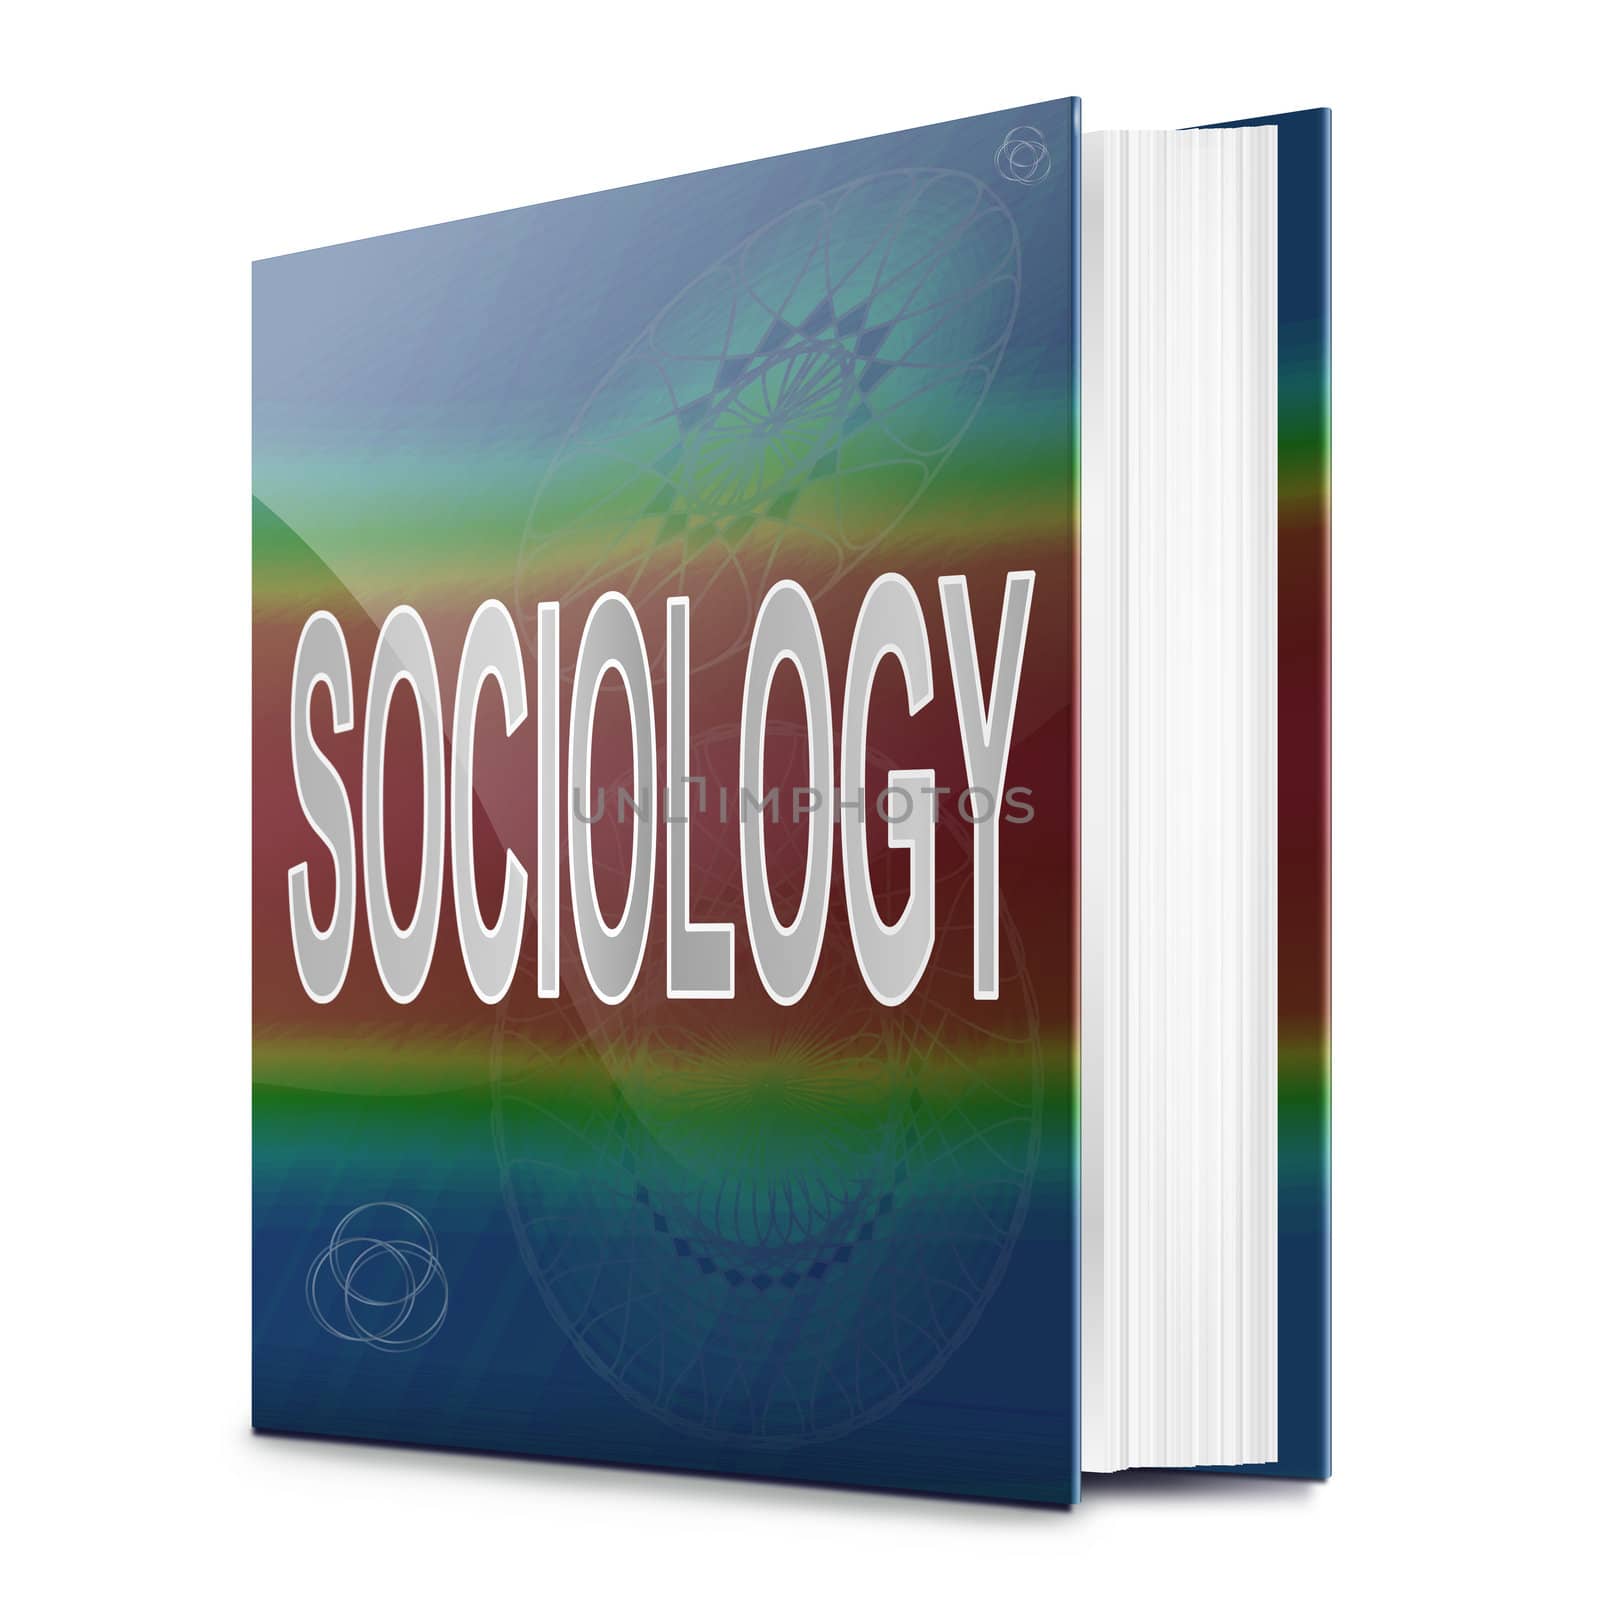 Sociology concept. by 72soul